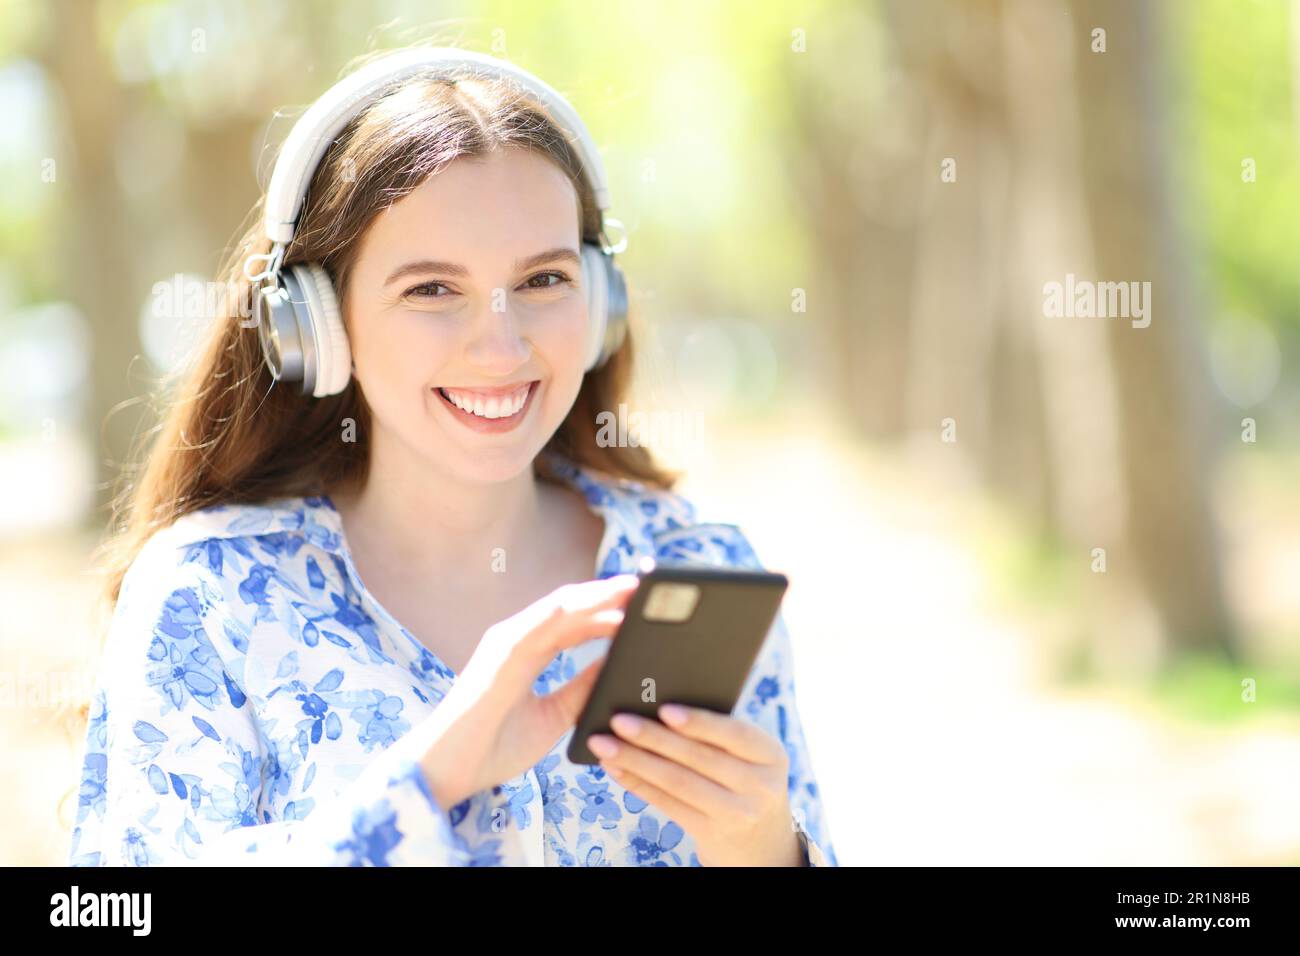 Happy woman wearing headphone listening music holding smartphone looking at camera outdoors Stock Photo